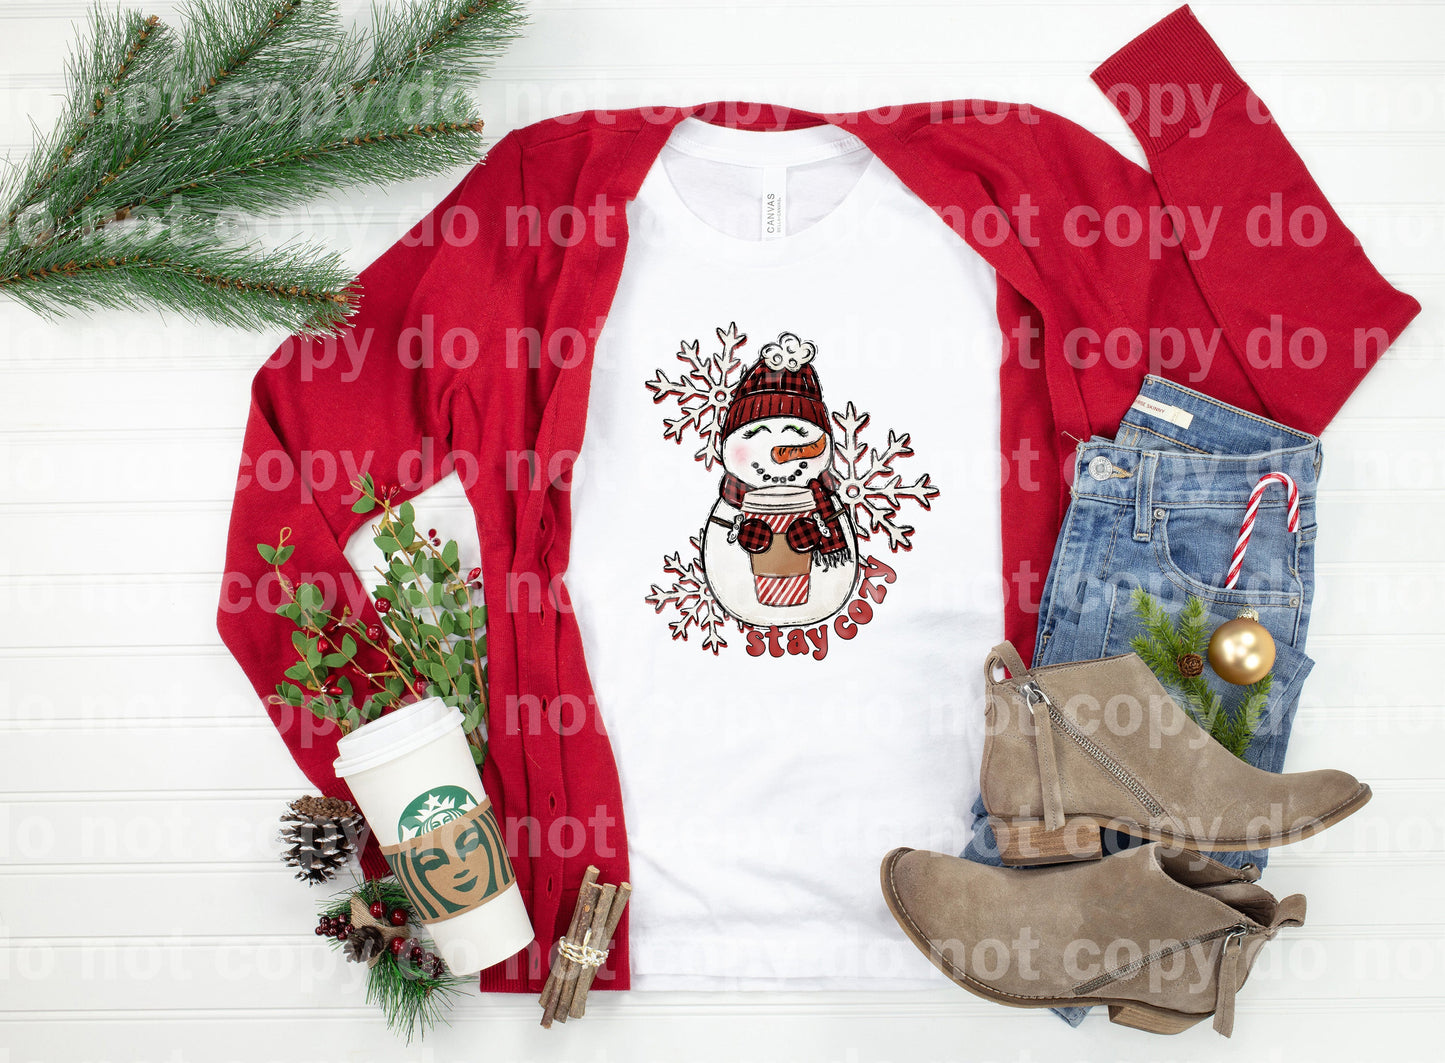 Stay Cozy Dream Print or Sublimation Print